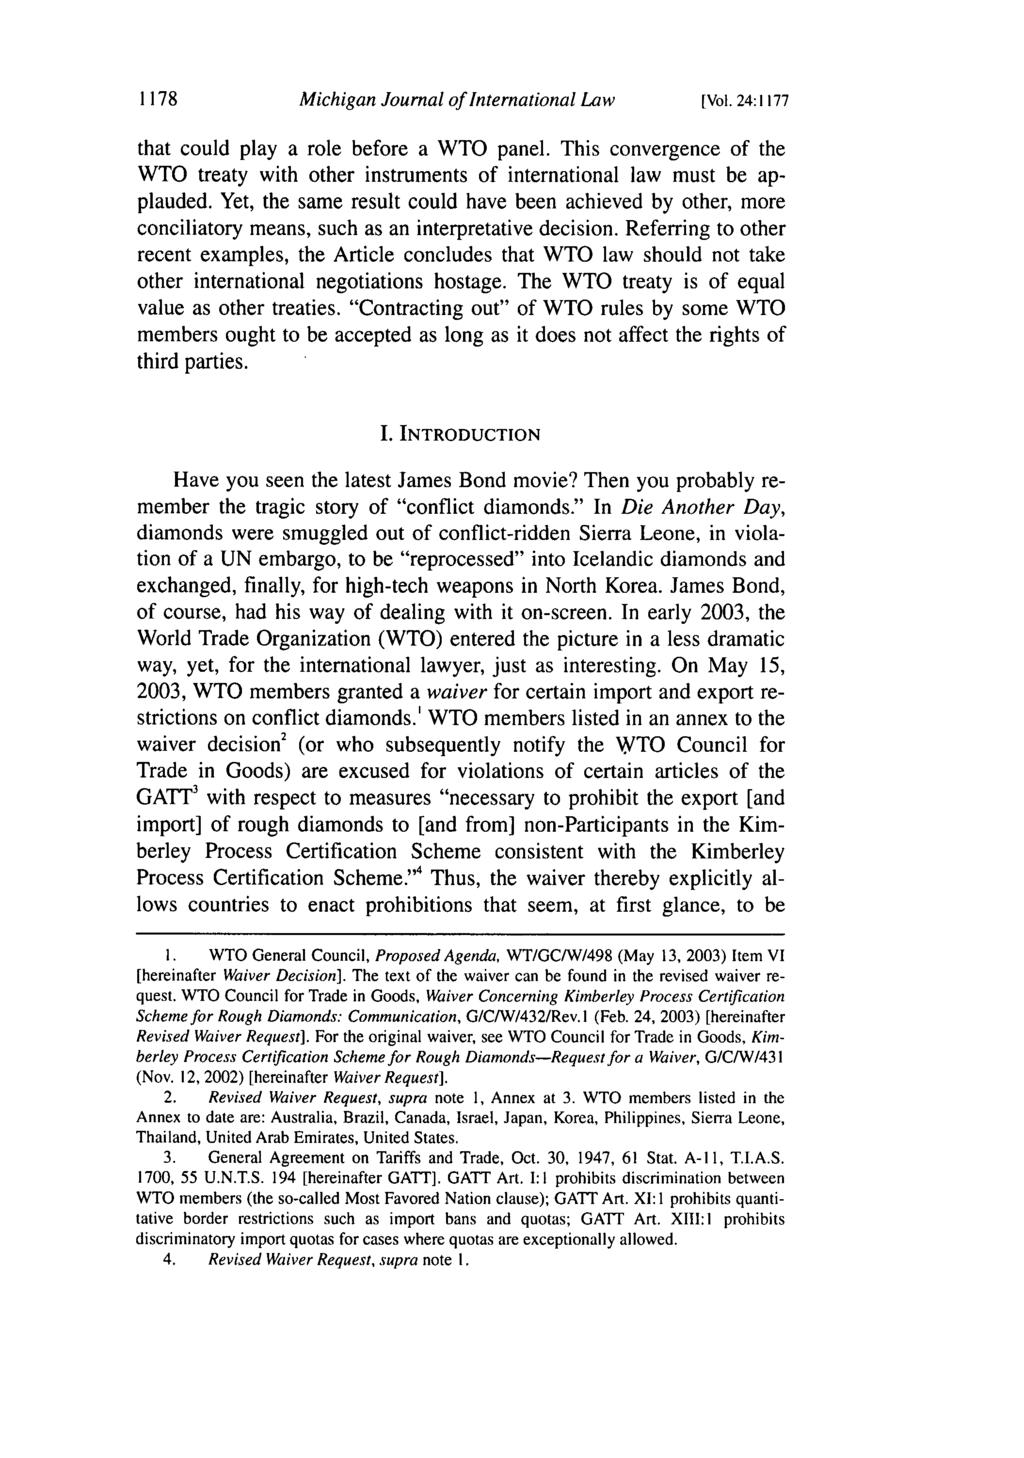 1178 Michigan Journal of International Law [Vol. 24:1177 that could play a role before a WTO panel. This convergence of the WTO treaty with other instruments of international law must be applauded.